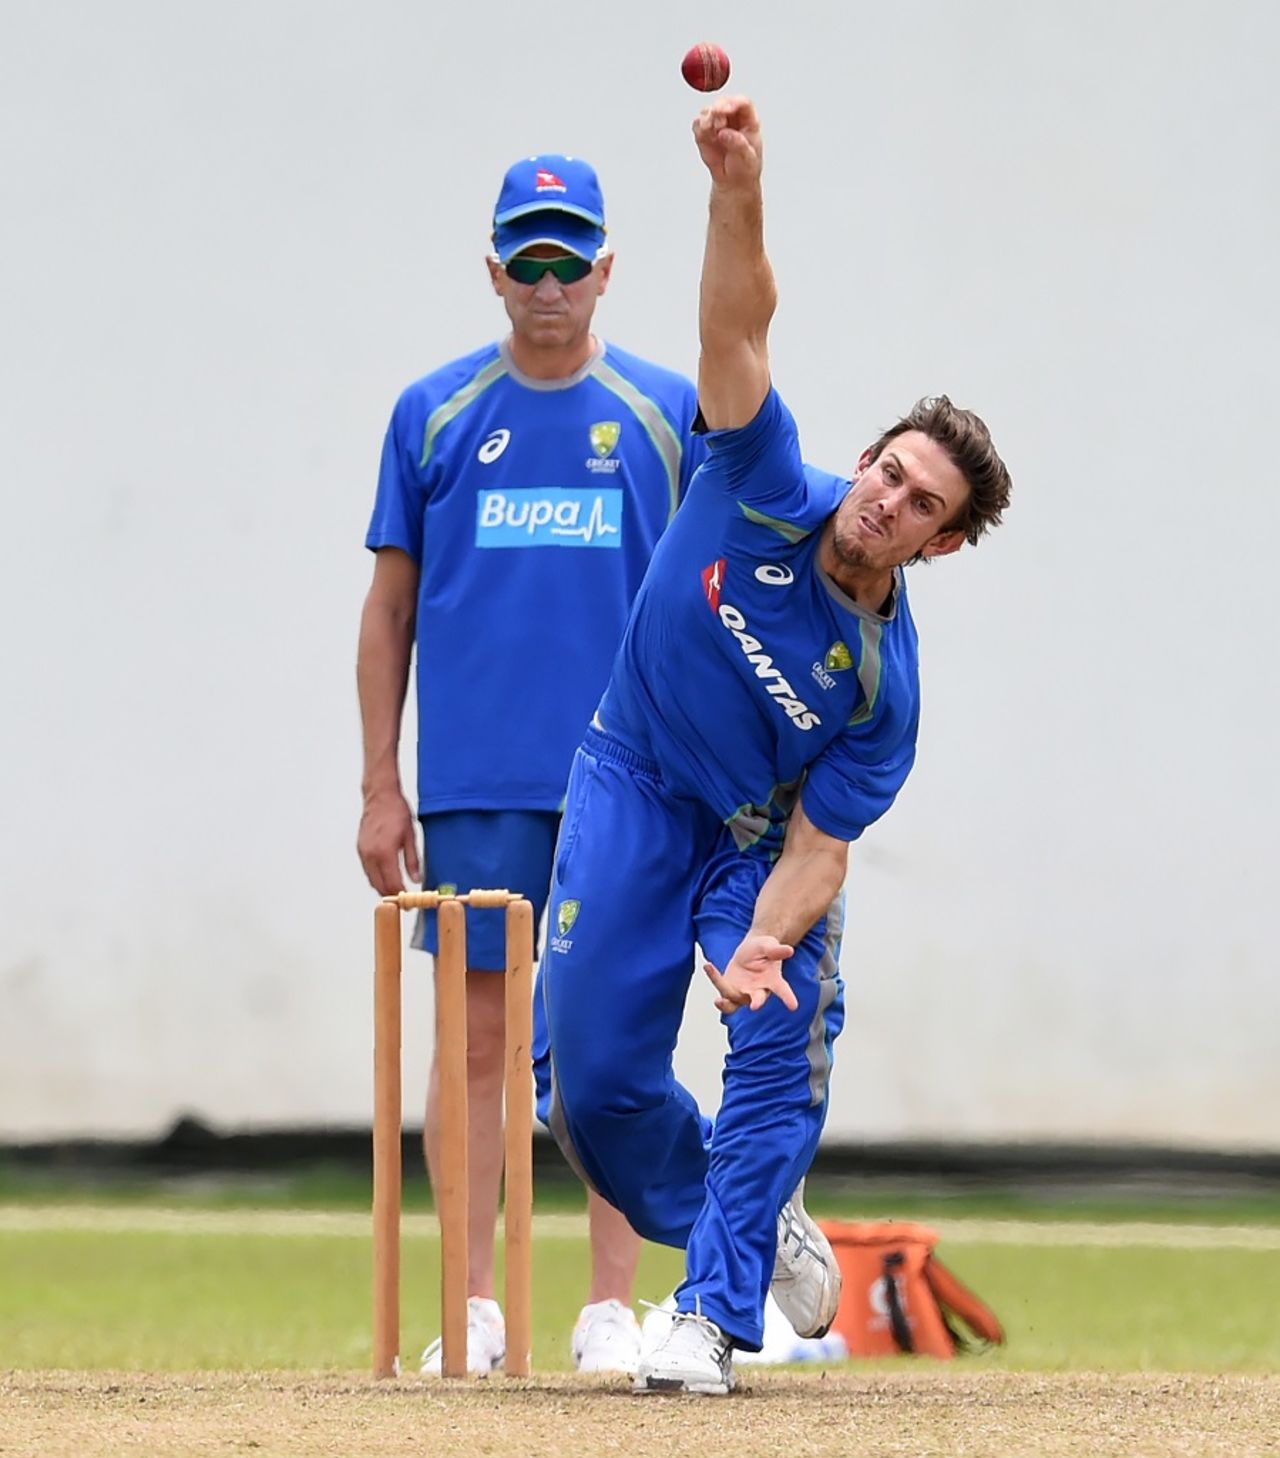 Mitchell Marsh bowls under the supervision of Allan Donald, Colombo, July 15, 2016